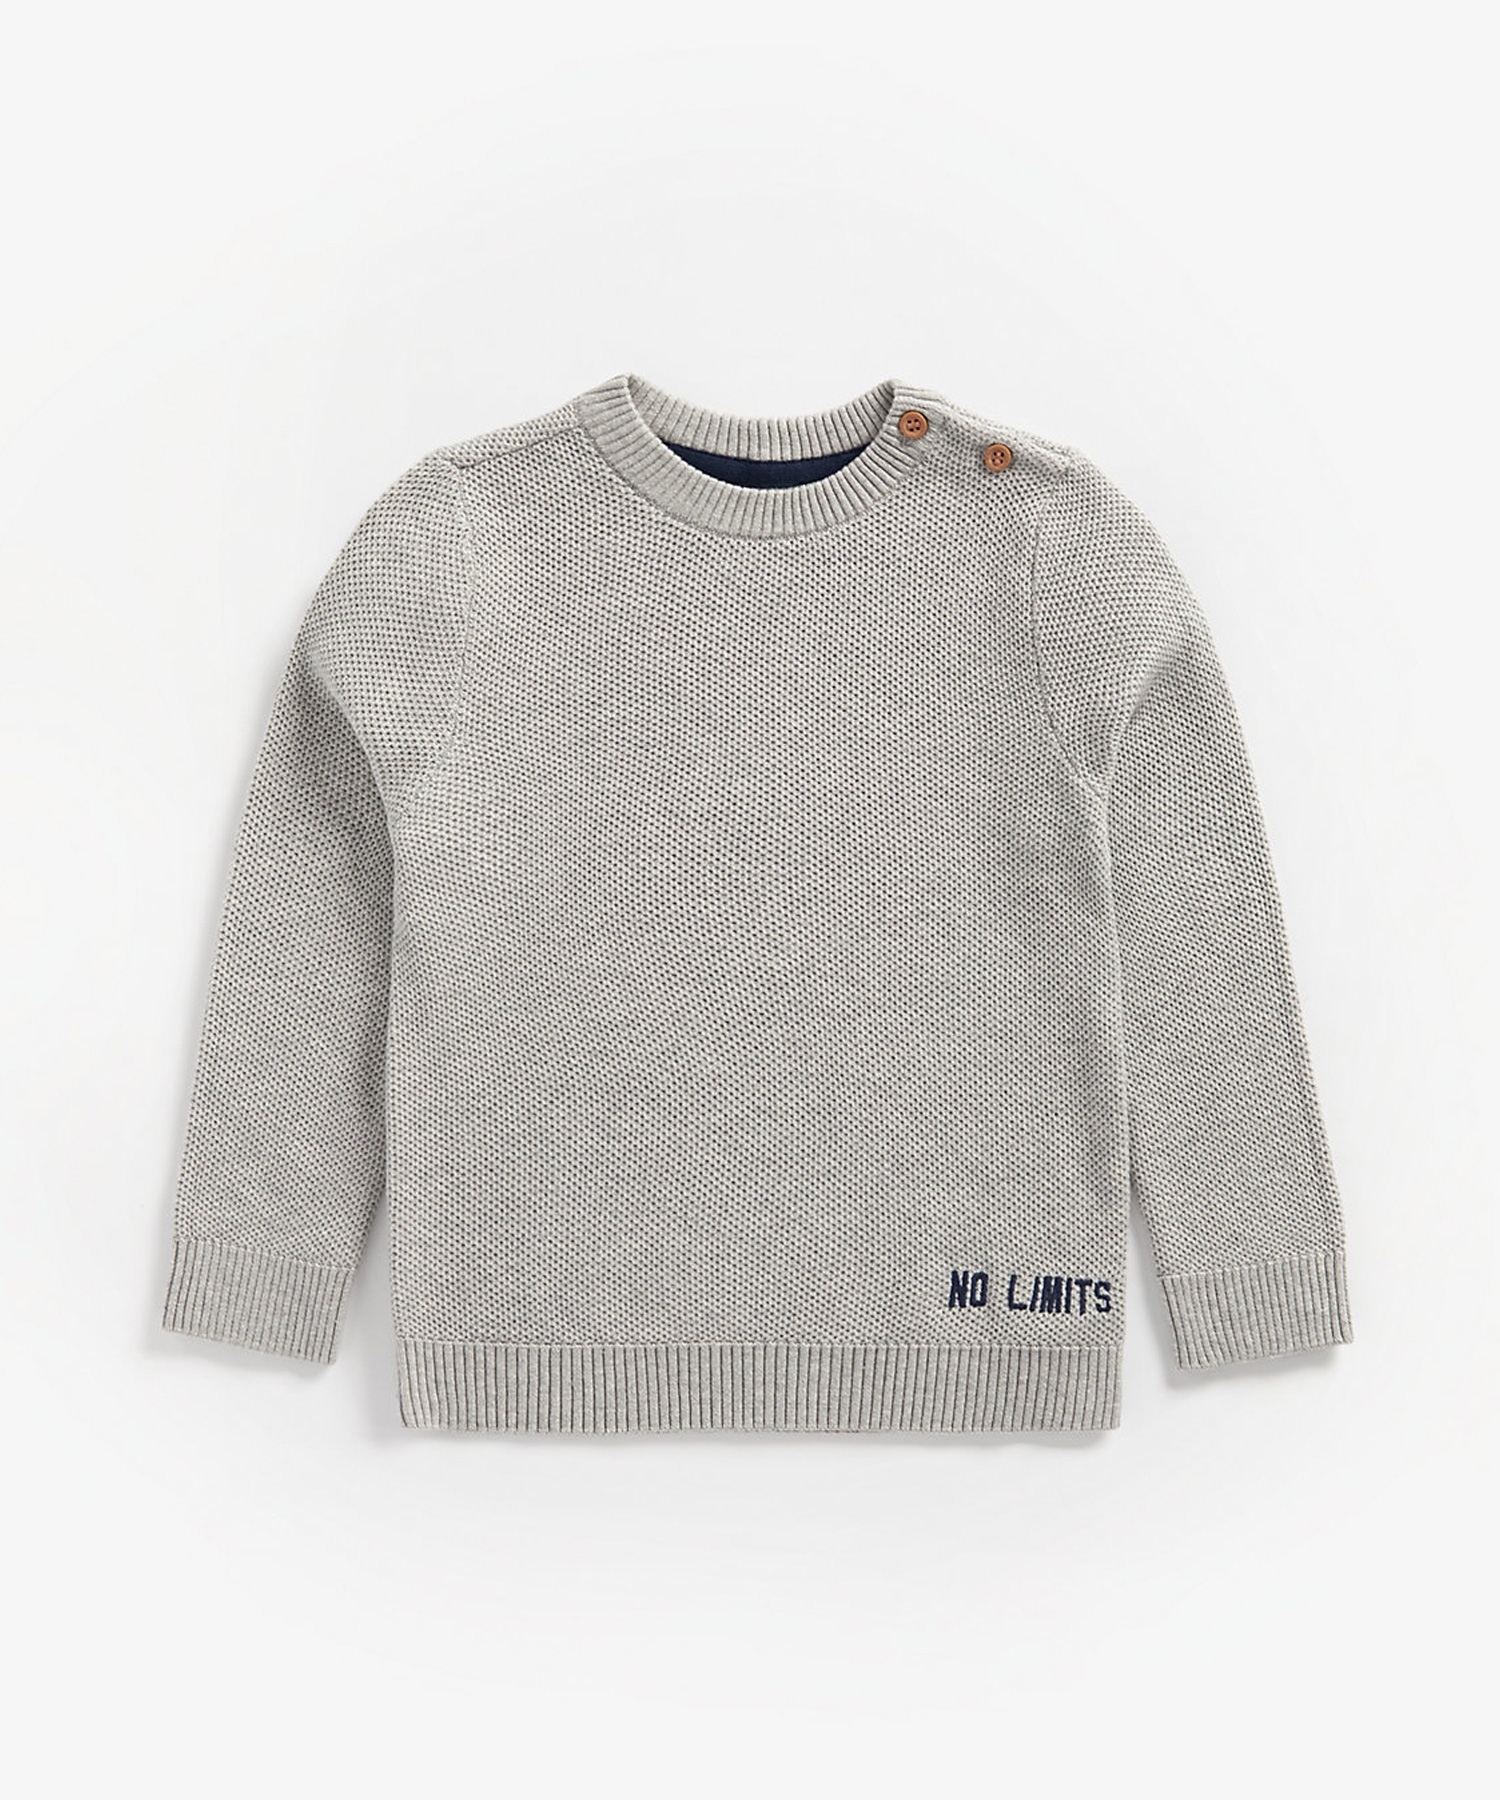 Mothercare | Boys Full Sleeves Sweater Text Embroidery - Grey